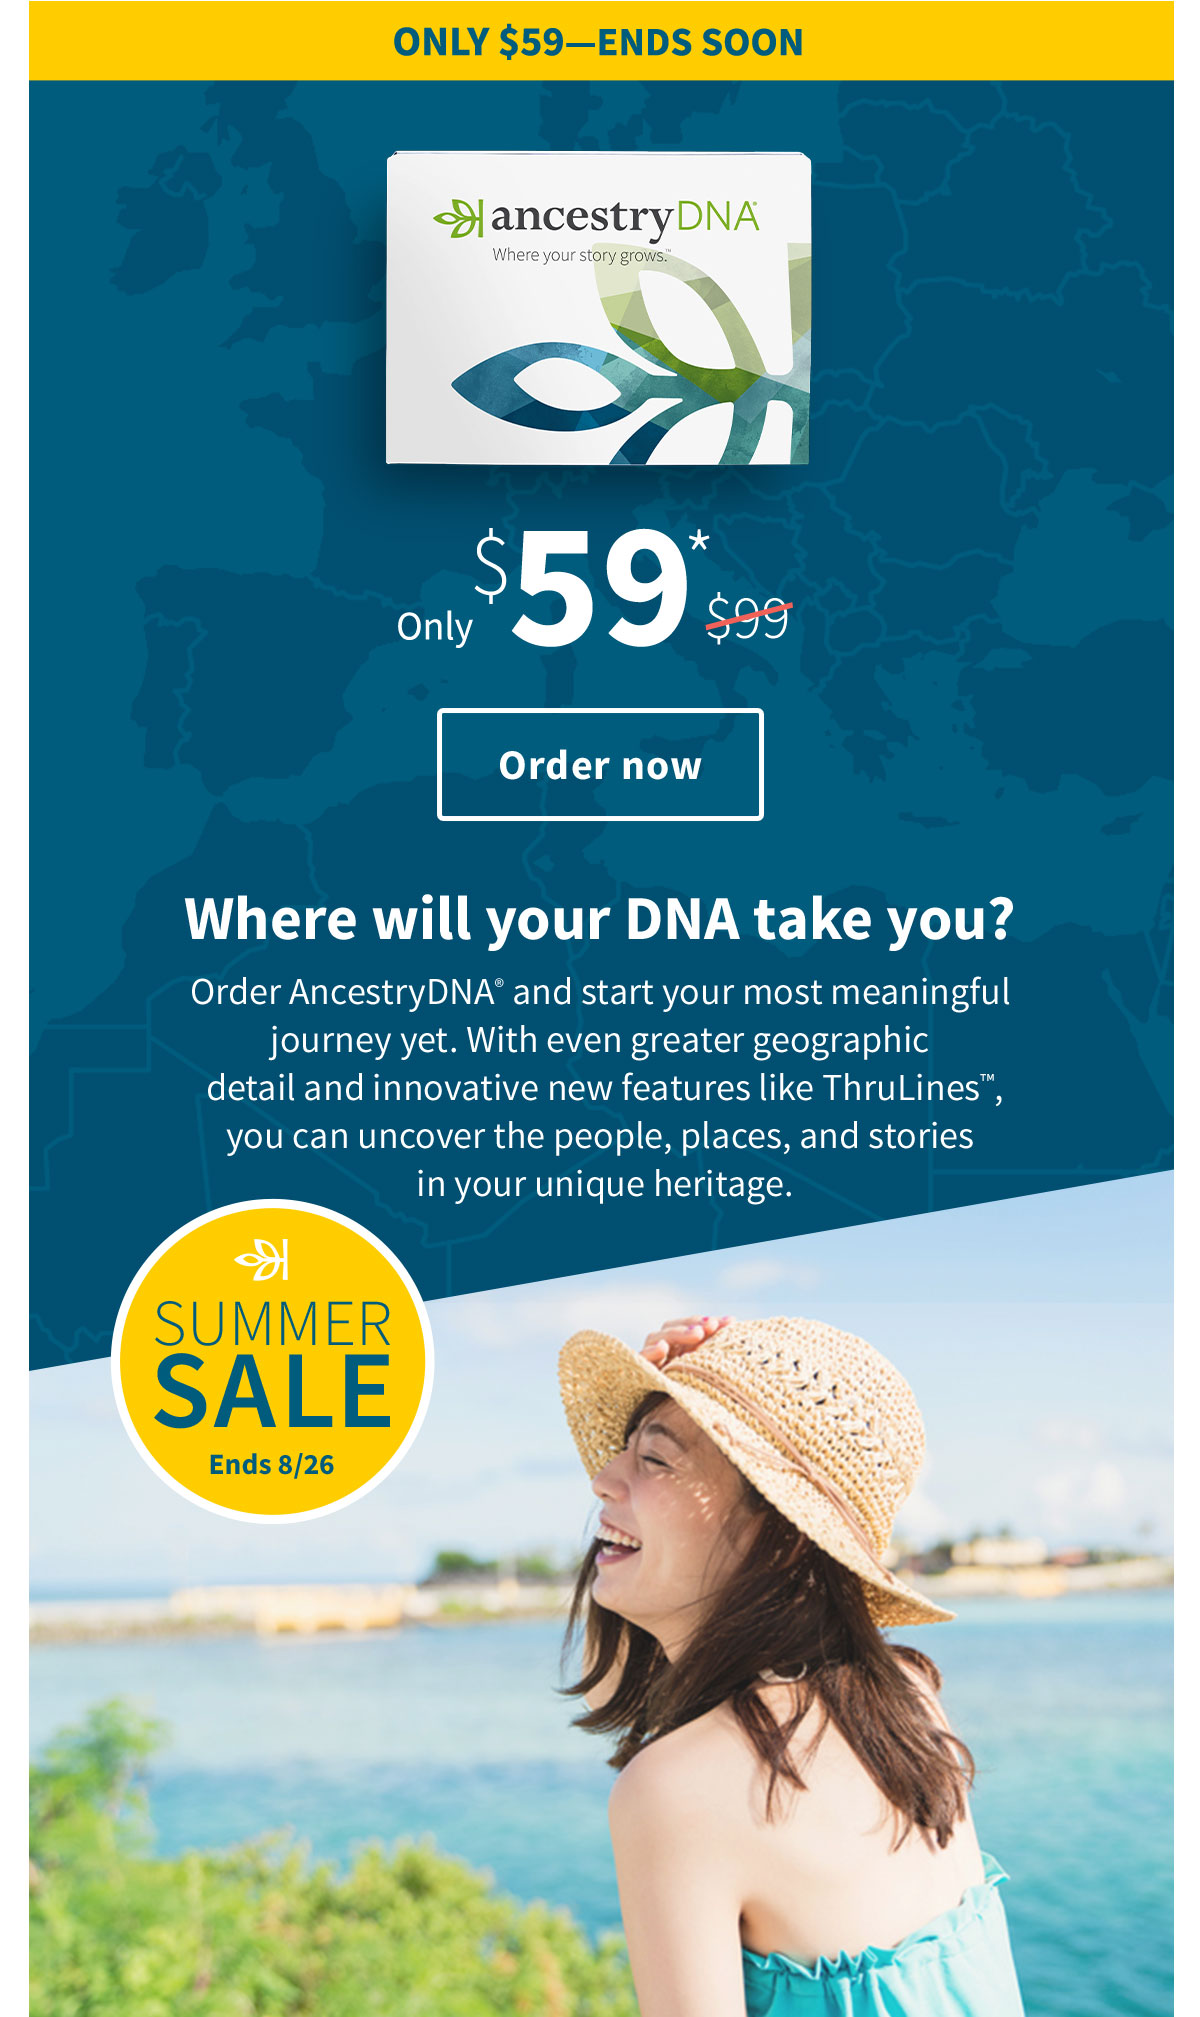 ONLY $59-ENDS SOON - Only $59* - Order now - Where will your DNA take you? - Order AncestryDNA and start your most meaningful journey yet. With even greater geographic detail and innovative new features like ThruLines™, you can uncover the people, places, and stories in your unique heritage.